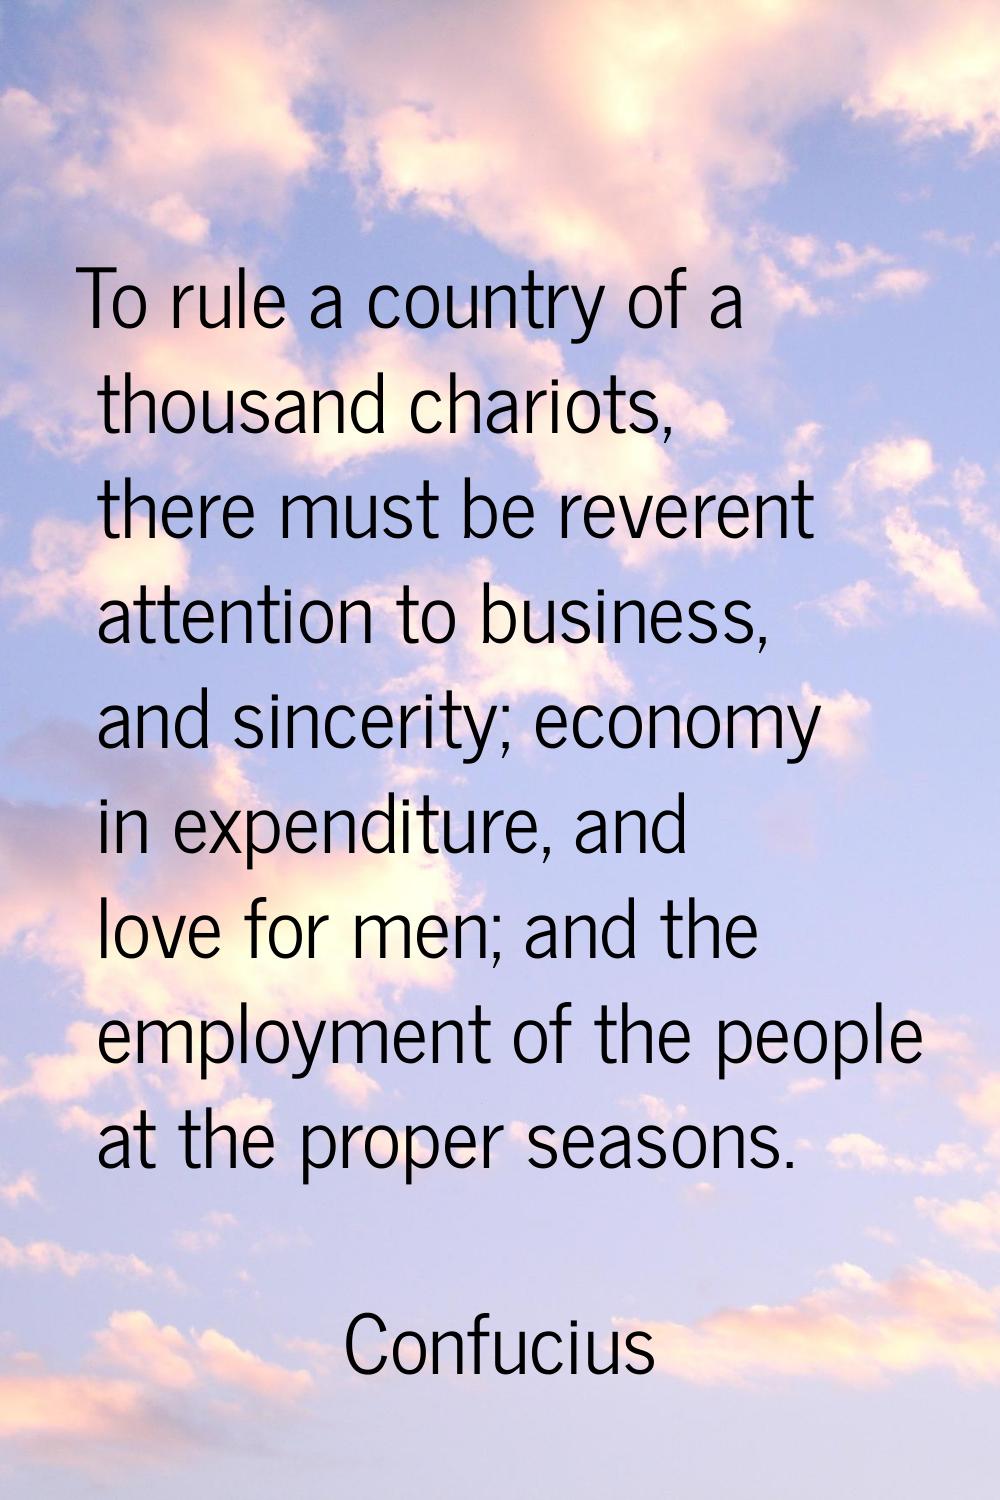 To rule a country of a thousand chariots, there must be reverent attention to business, and sinceri